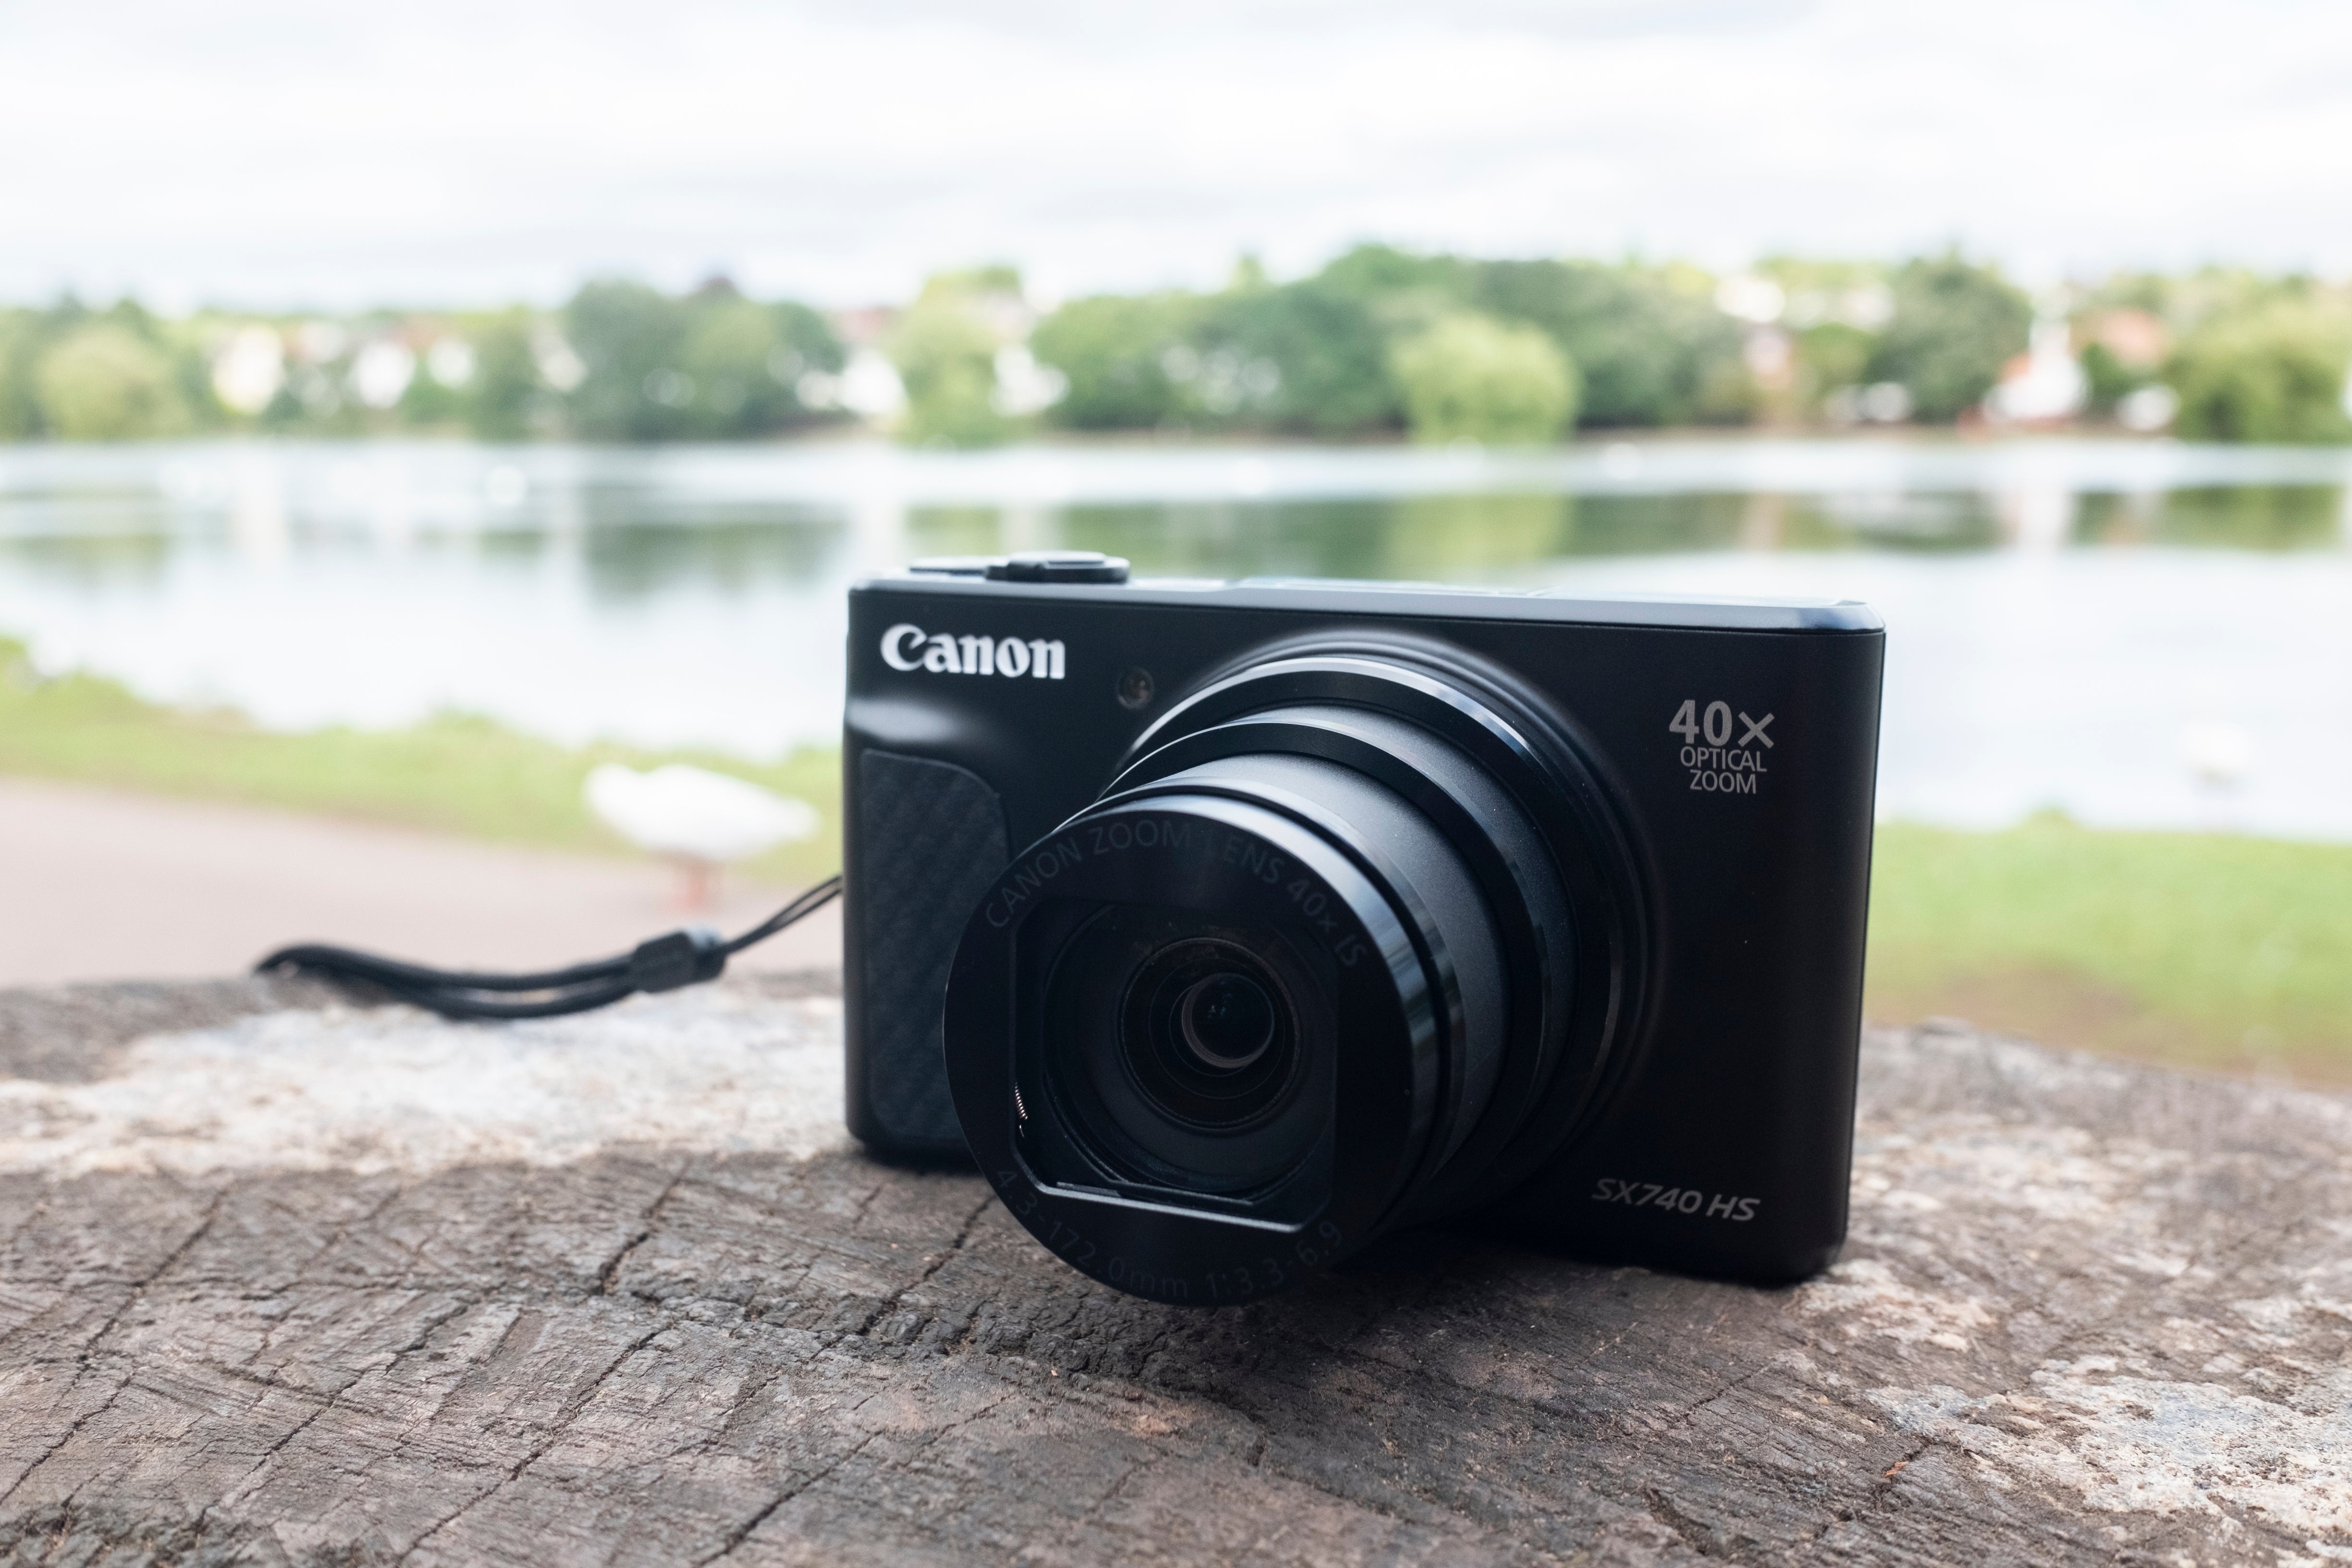 Canon PowerShot SX740 HS Review | Trusted Reviews